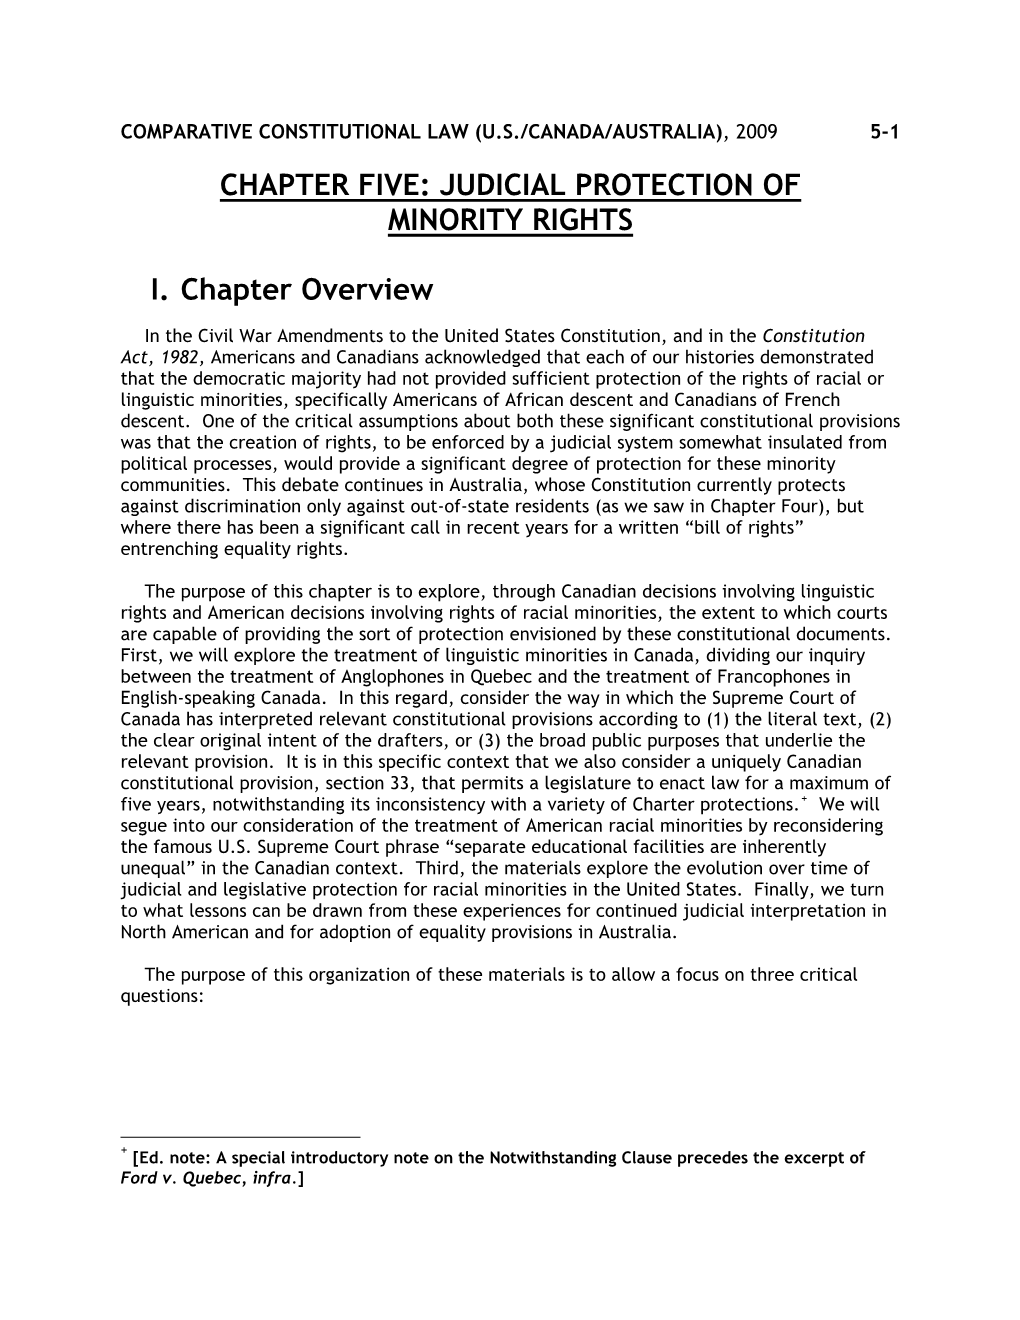 Chapter Five: Judicial Protection of Minority Rights